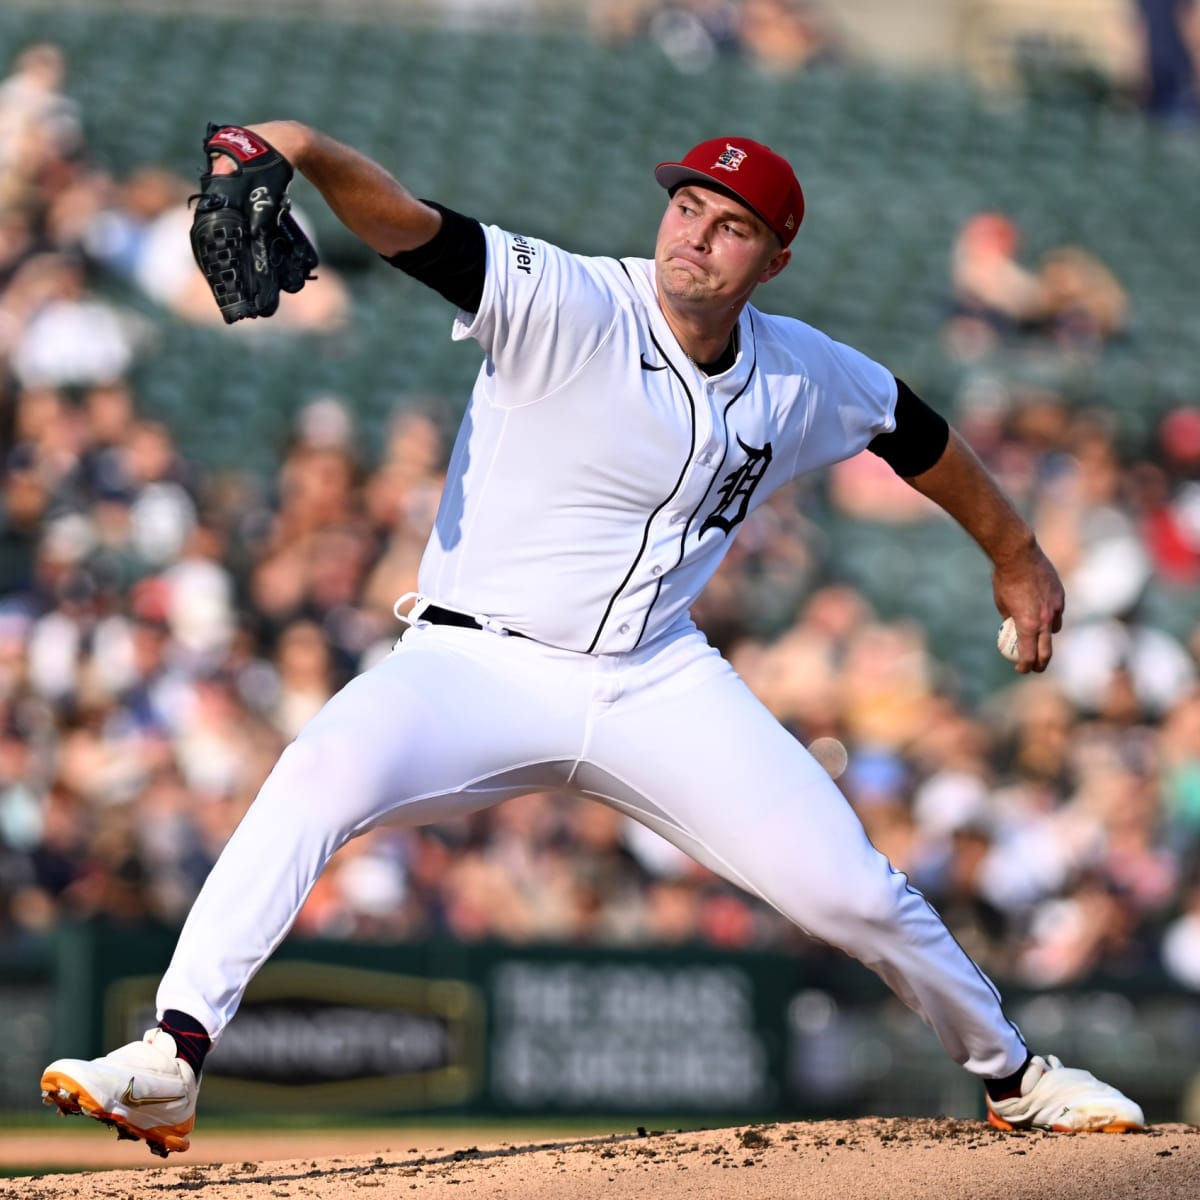 Detroit Tigers Lose In Historically Fashion on Tuesday - Fastball